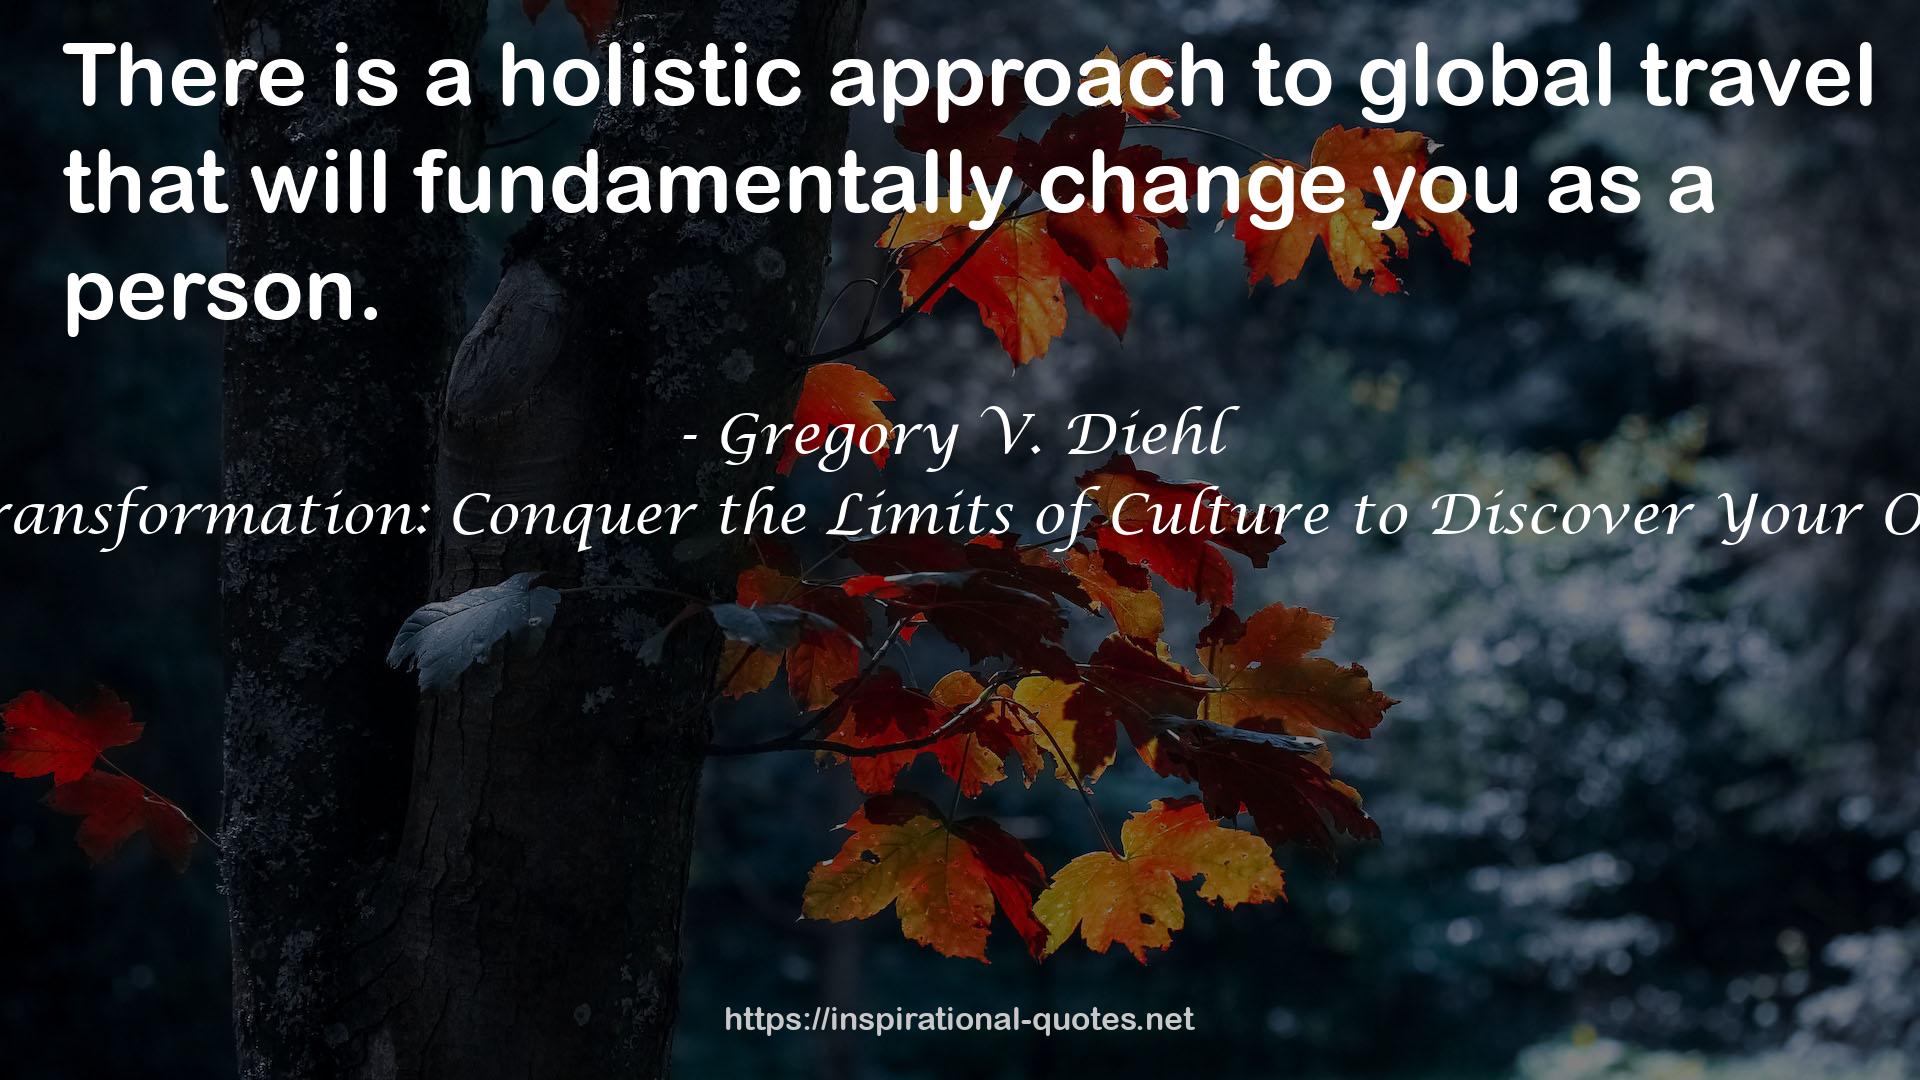 Travel as Transformation: Conquer the Limits of Culture to Discover Your Own Identity QUOTES